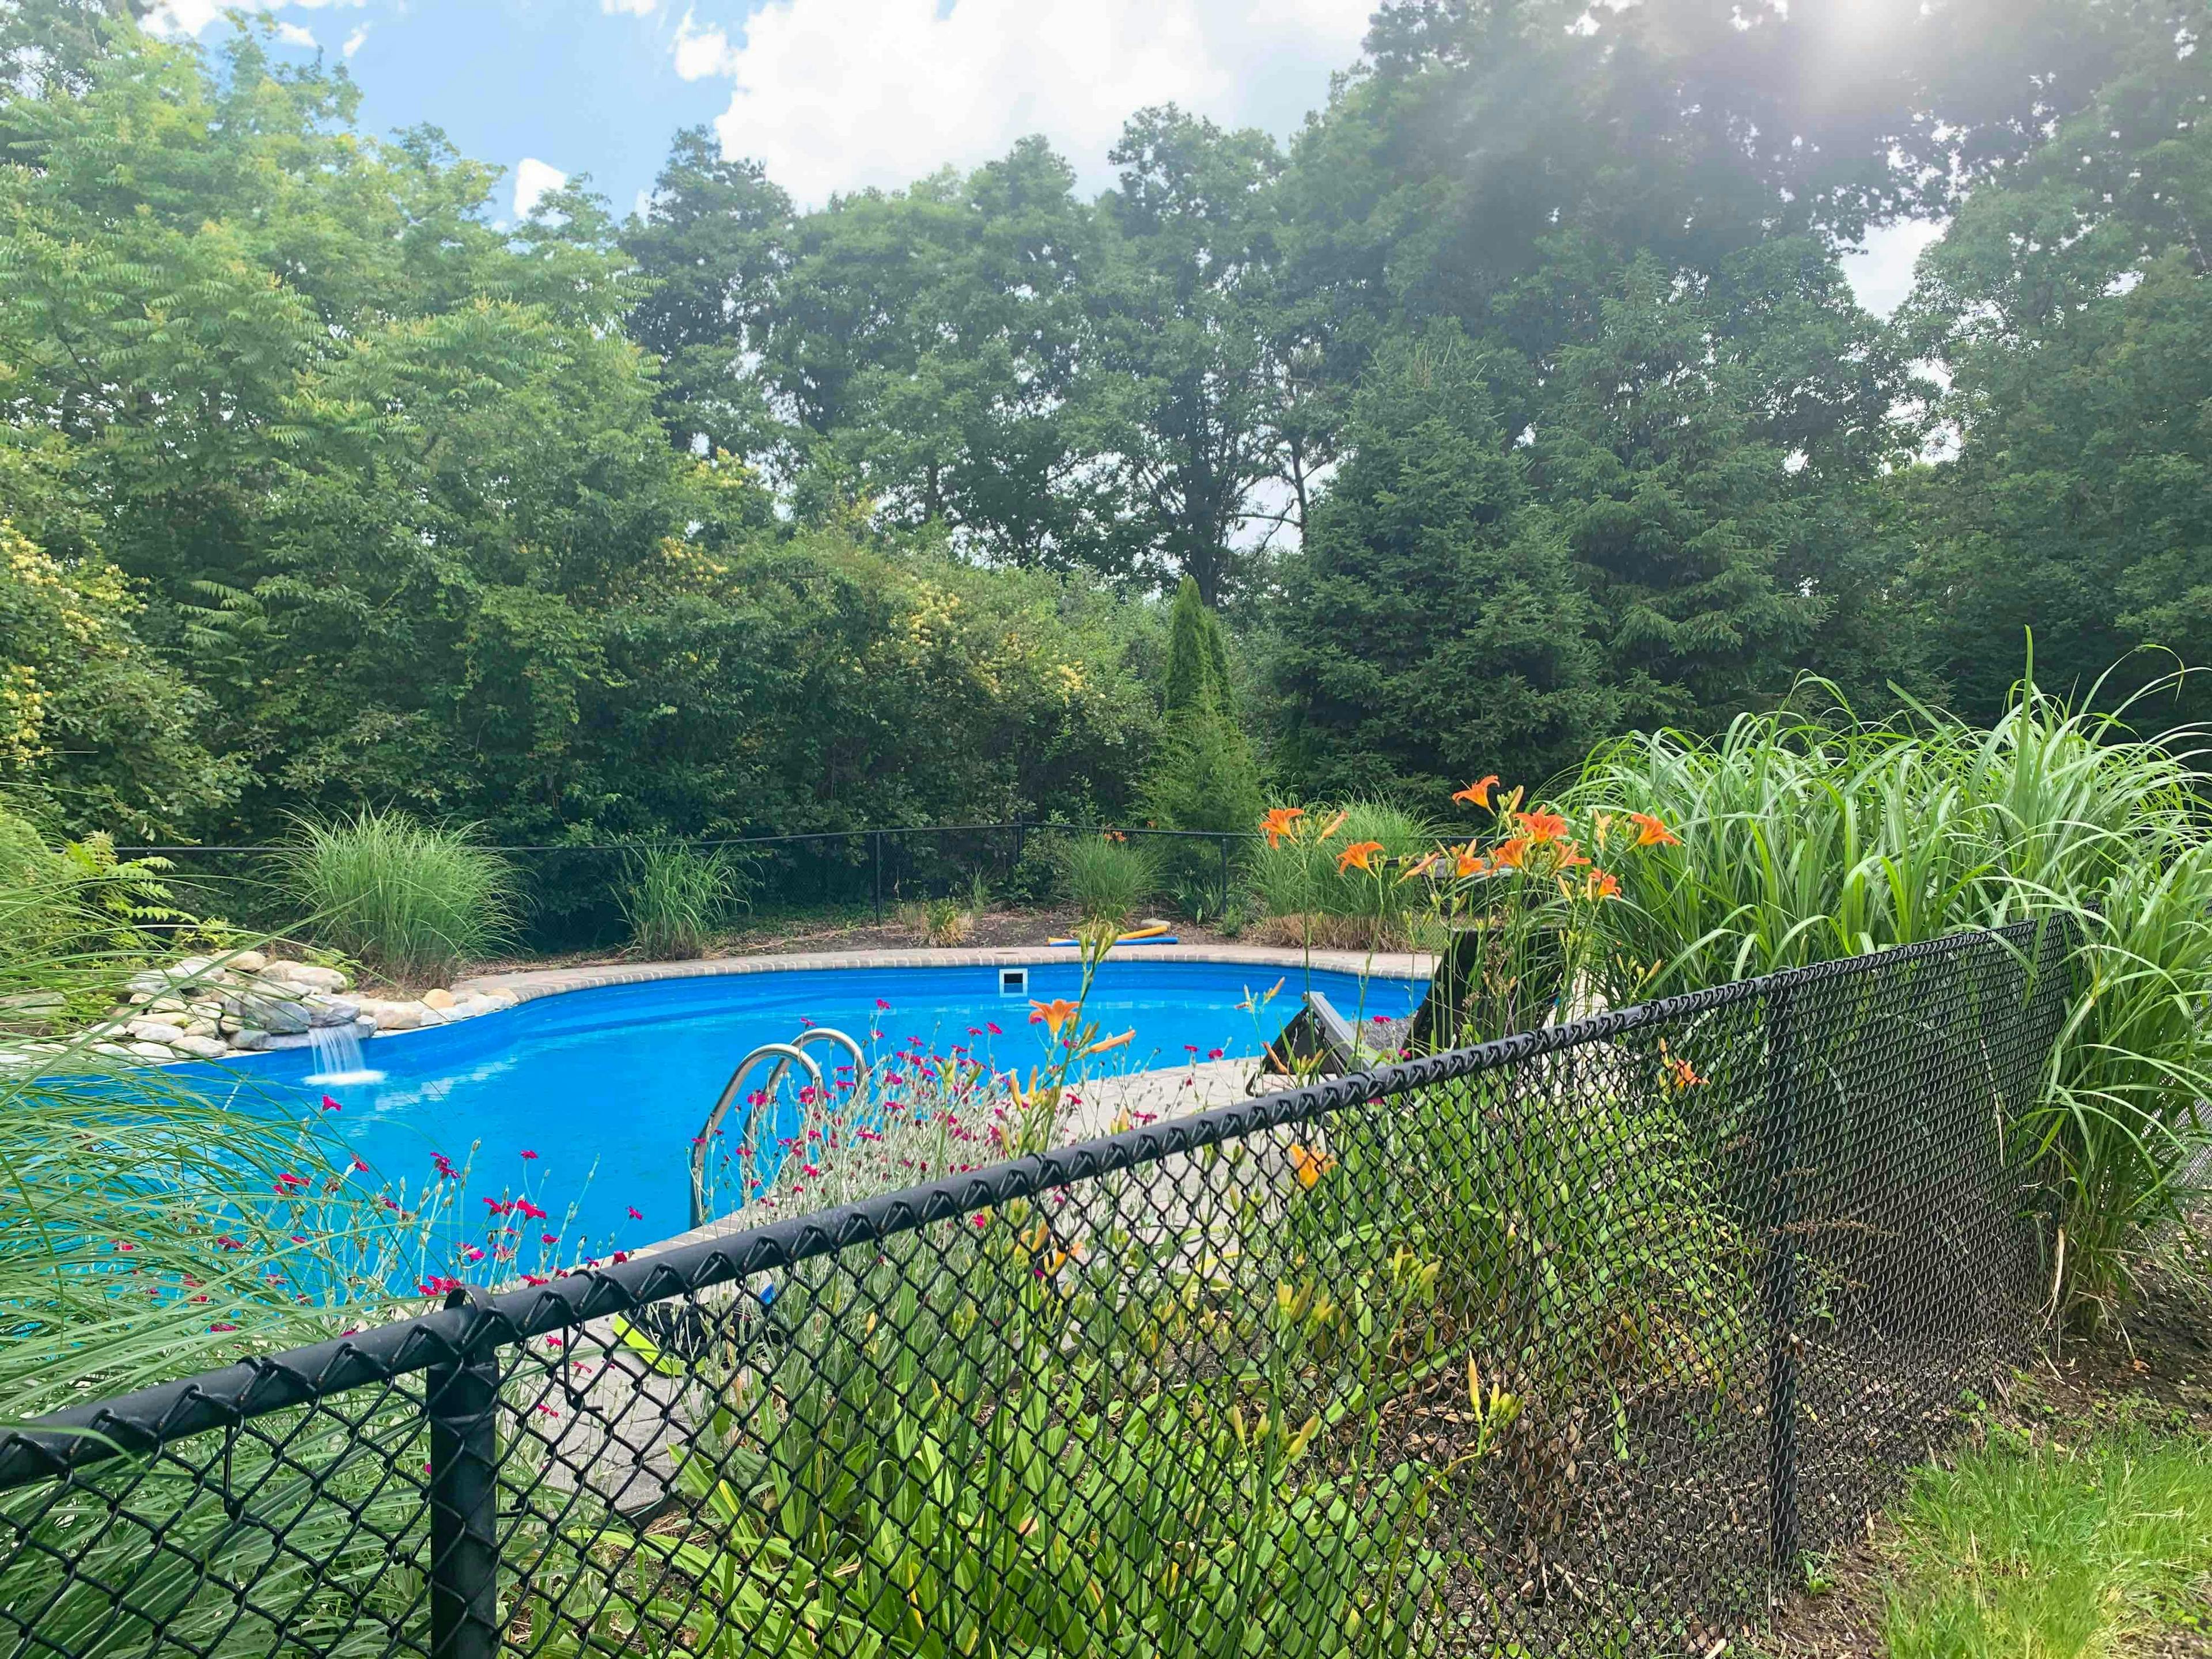 Private Backyard Pool + Hot Tub | Come to Relax!